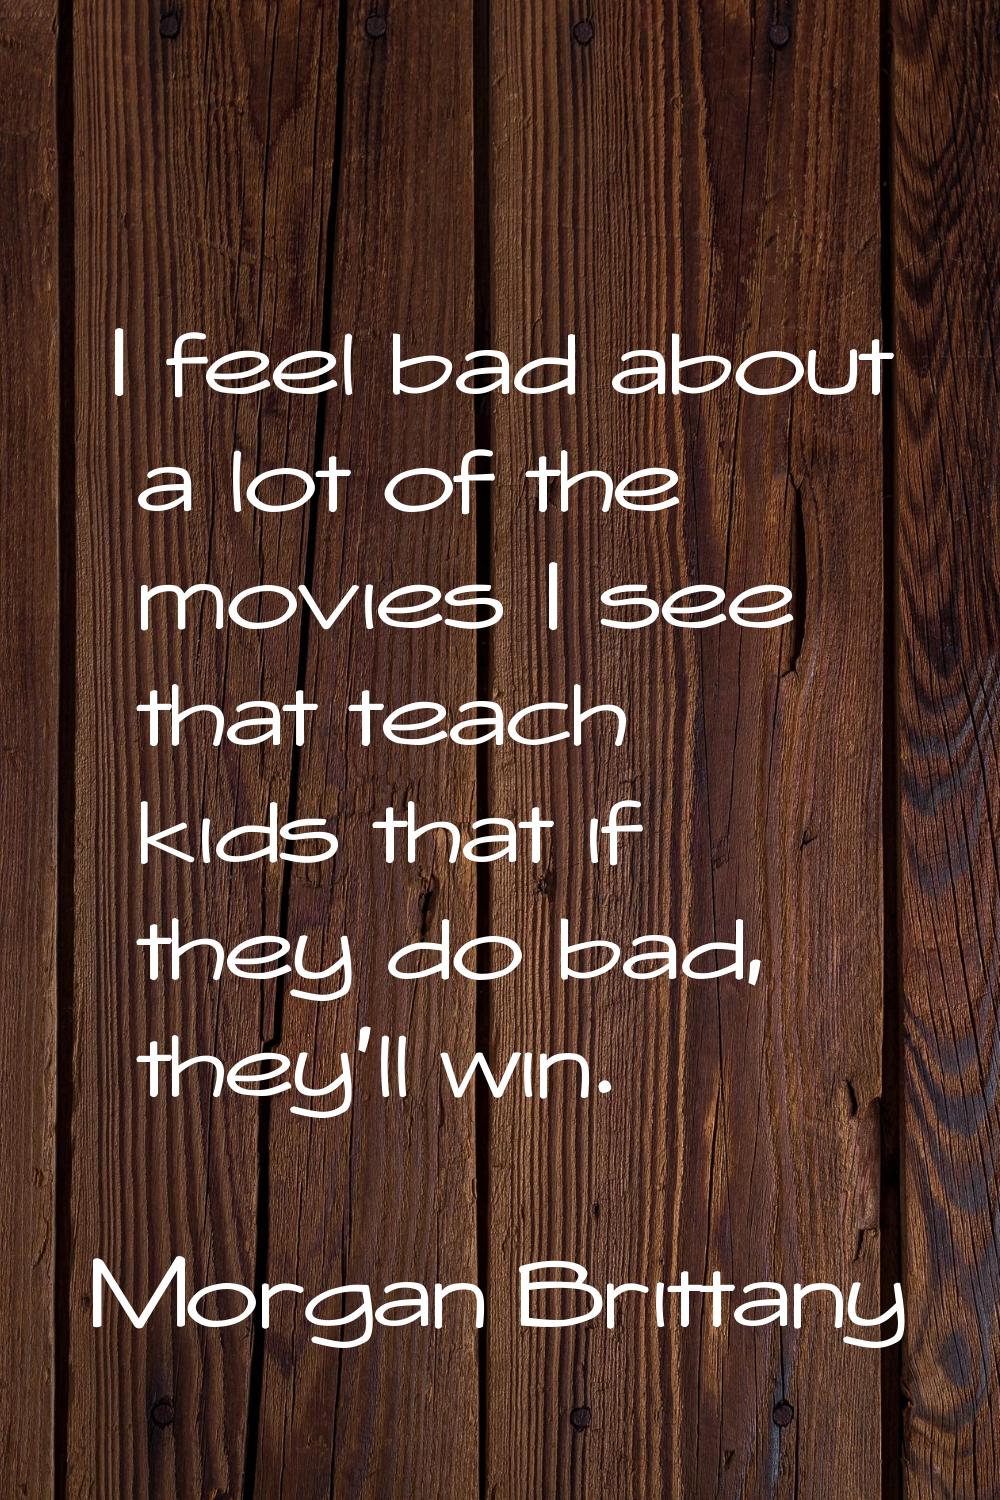 I feel bad about a lot of the movies I see that teach kids that if they do bad, they'll win.